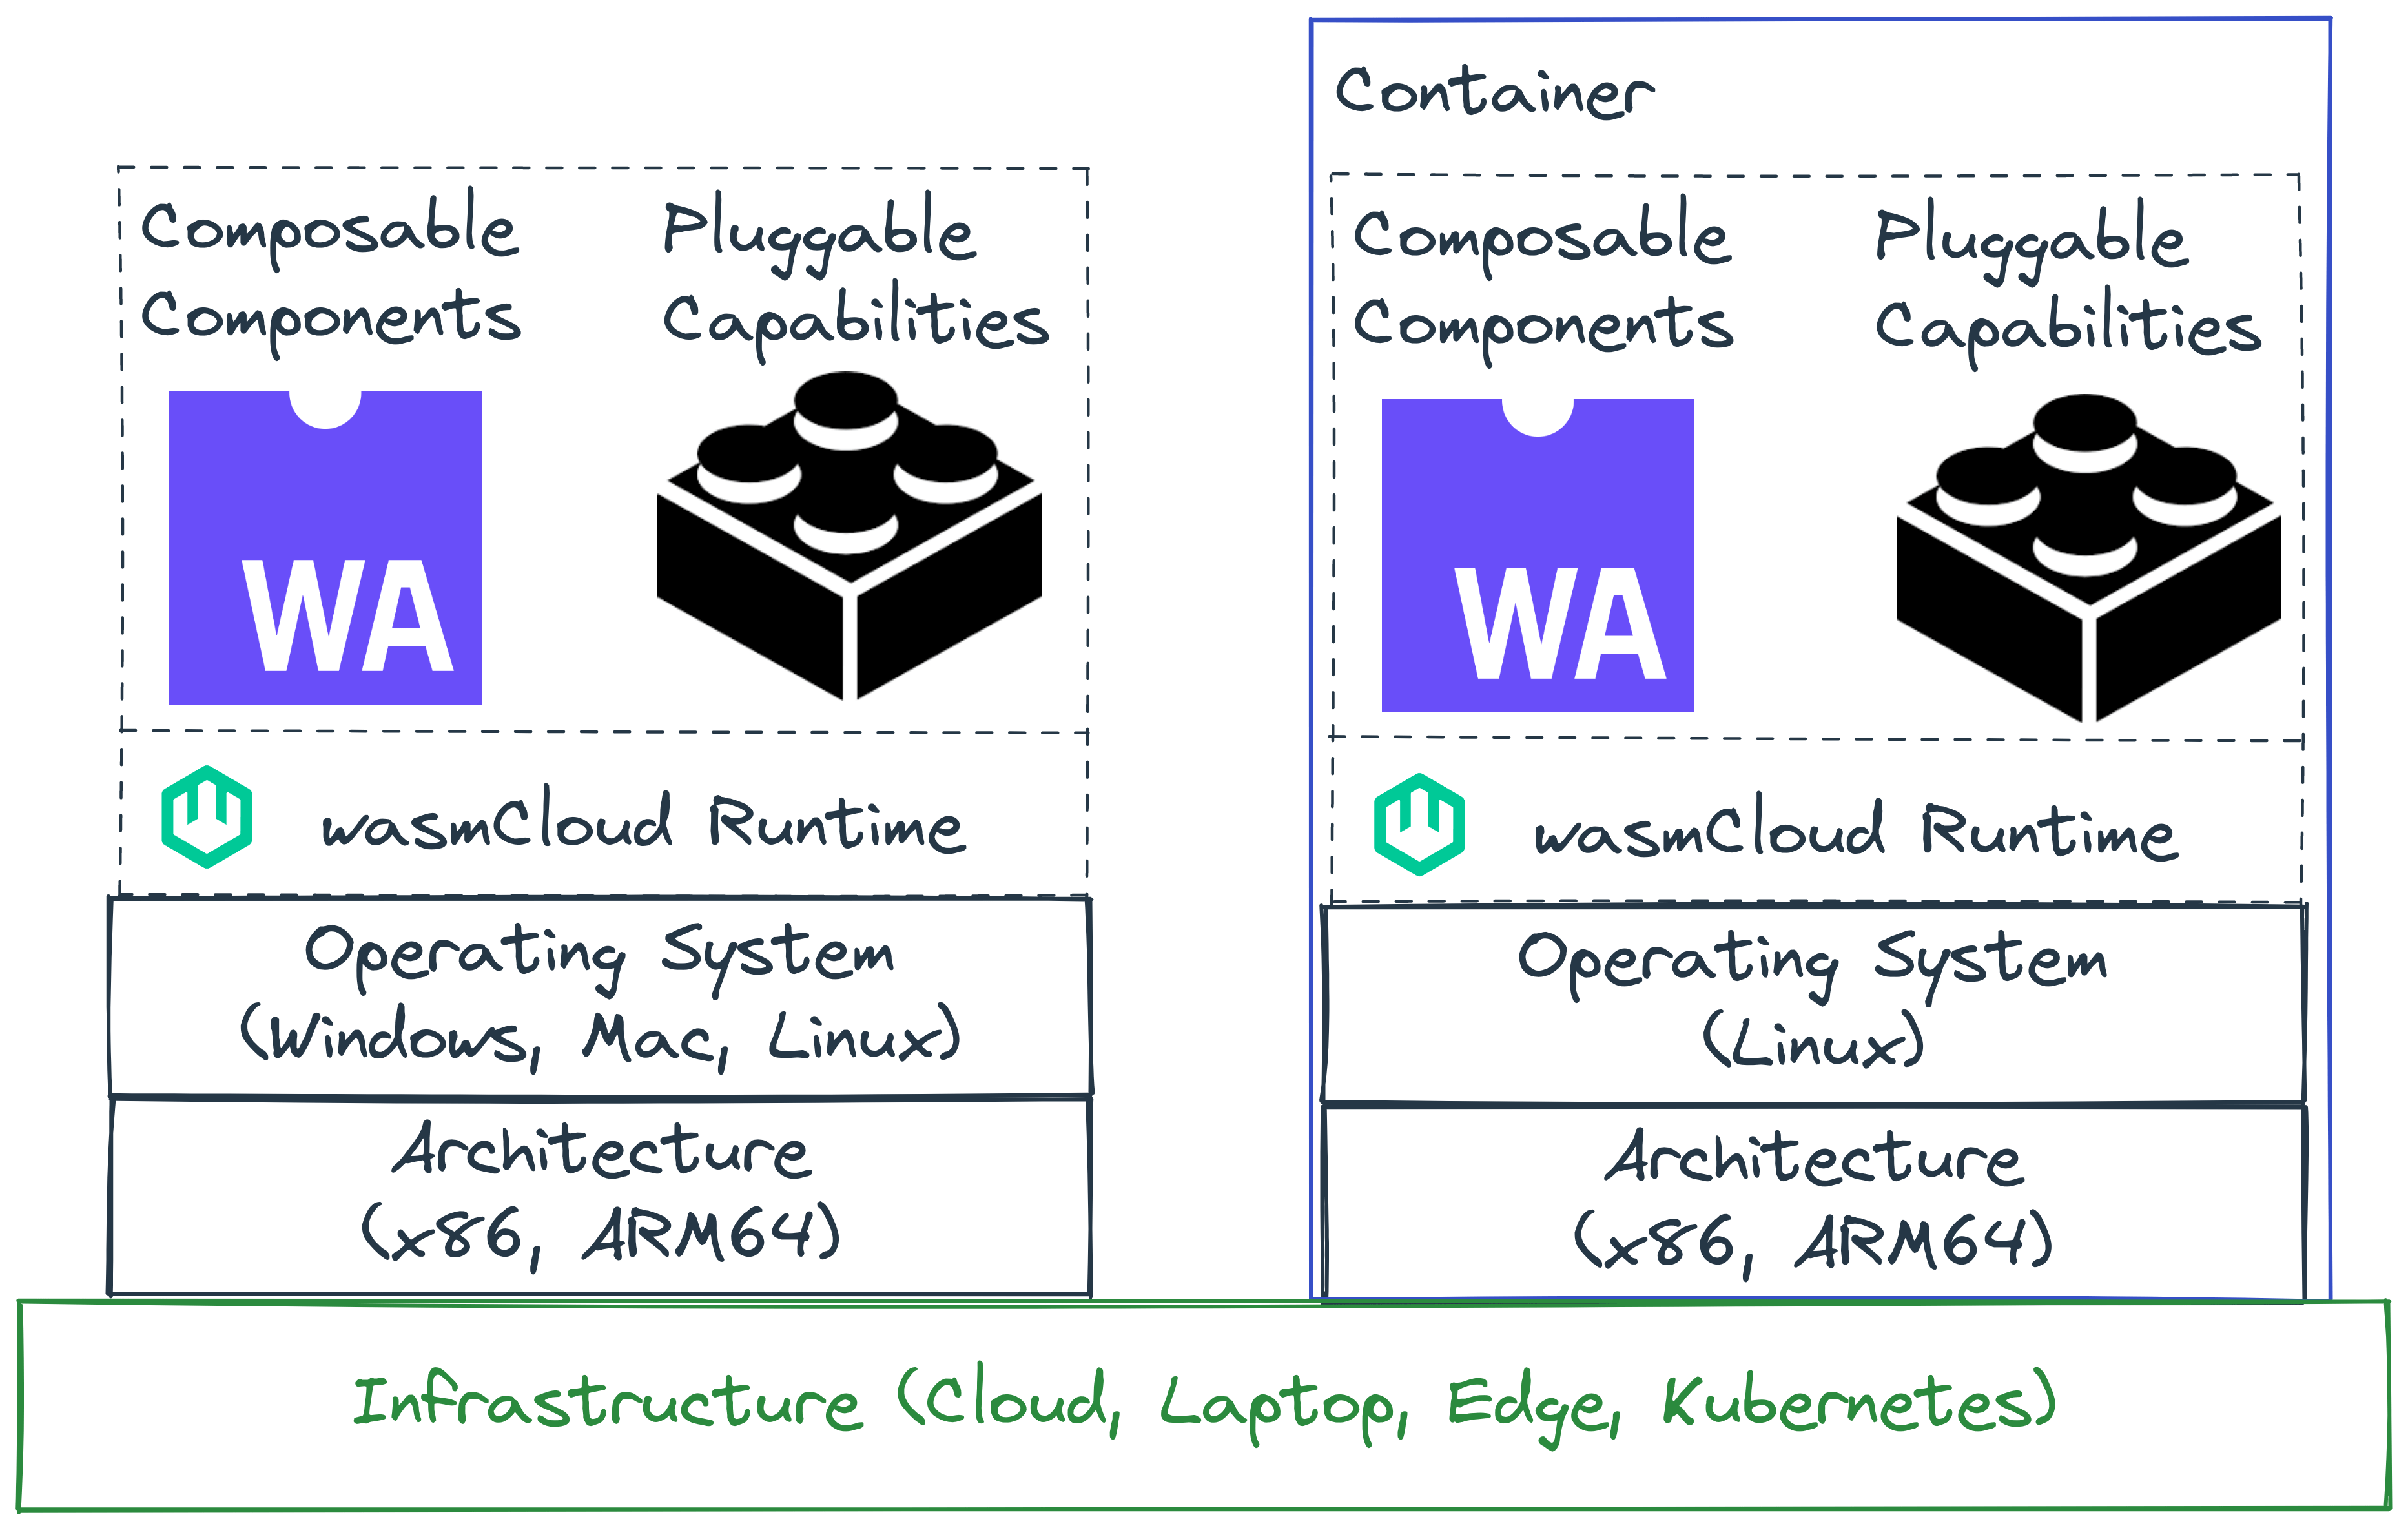 wasmCloud architecture with and without container